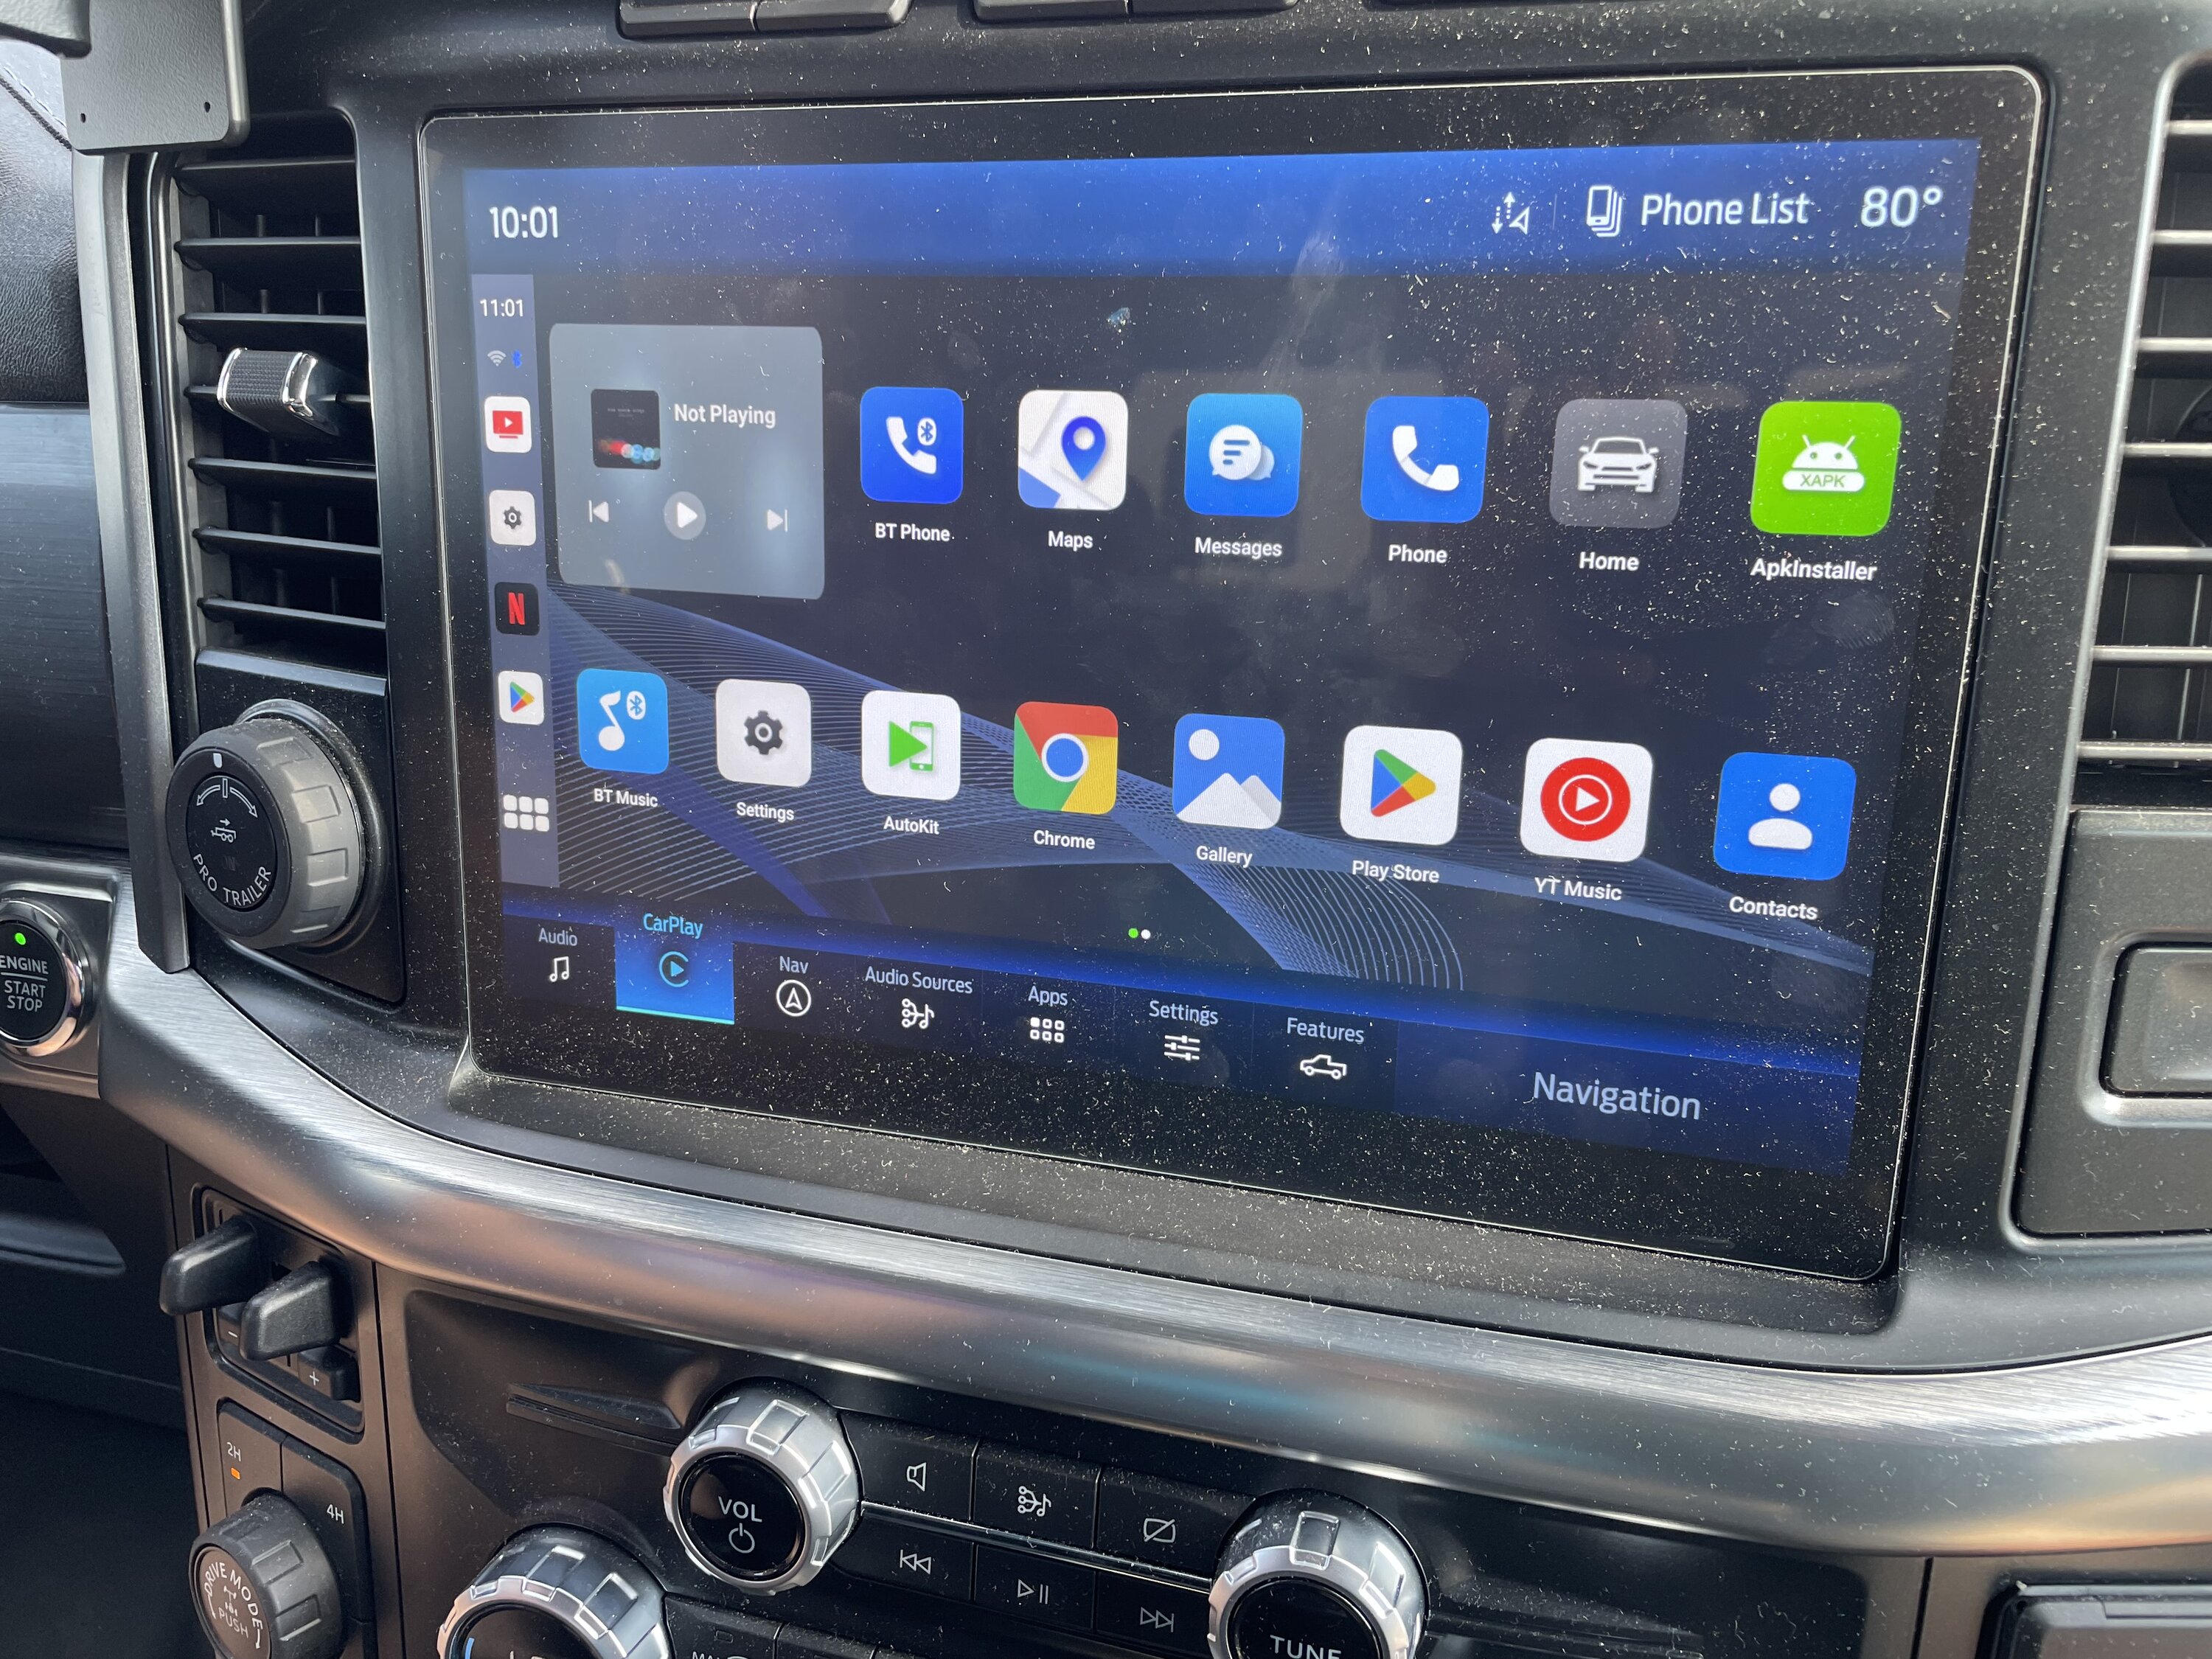 Ford F-150 Android Streaming boxes - MMB, Magic Box, Carlinkit, etc IMG_5395